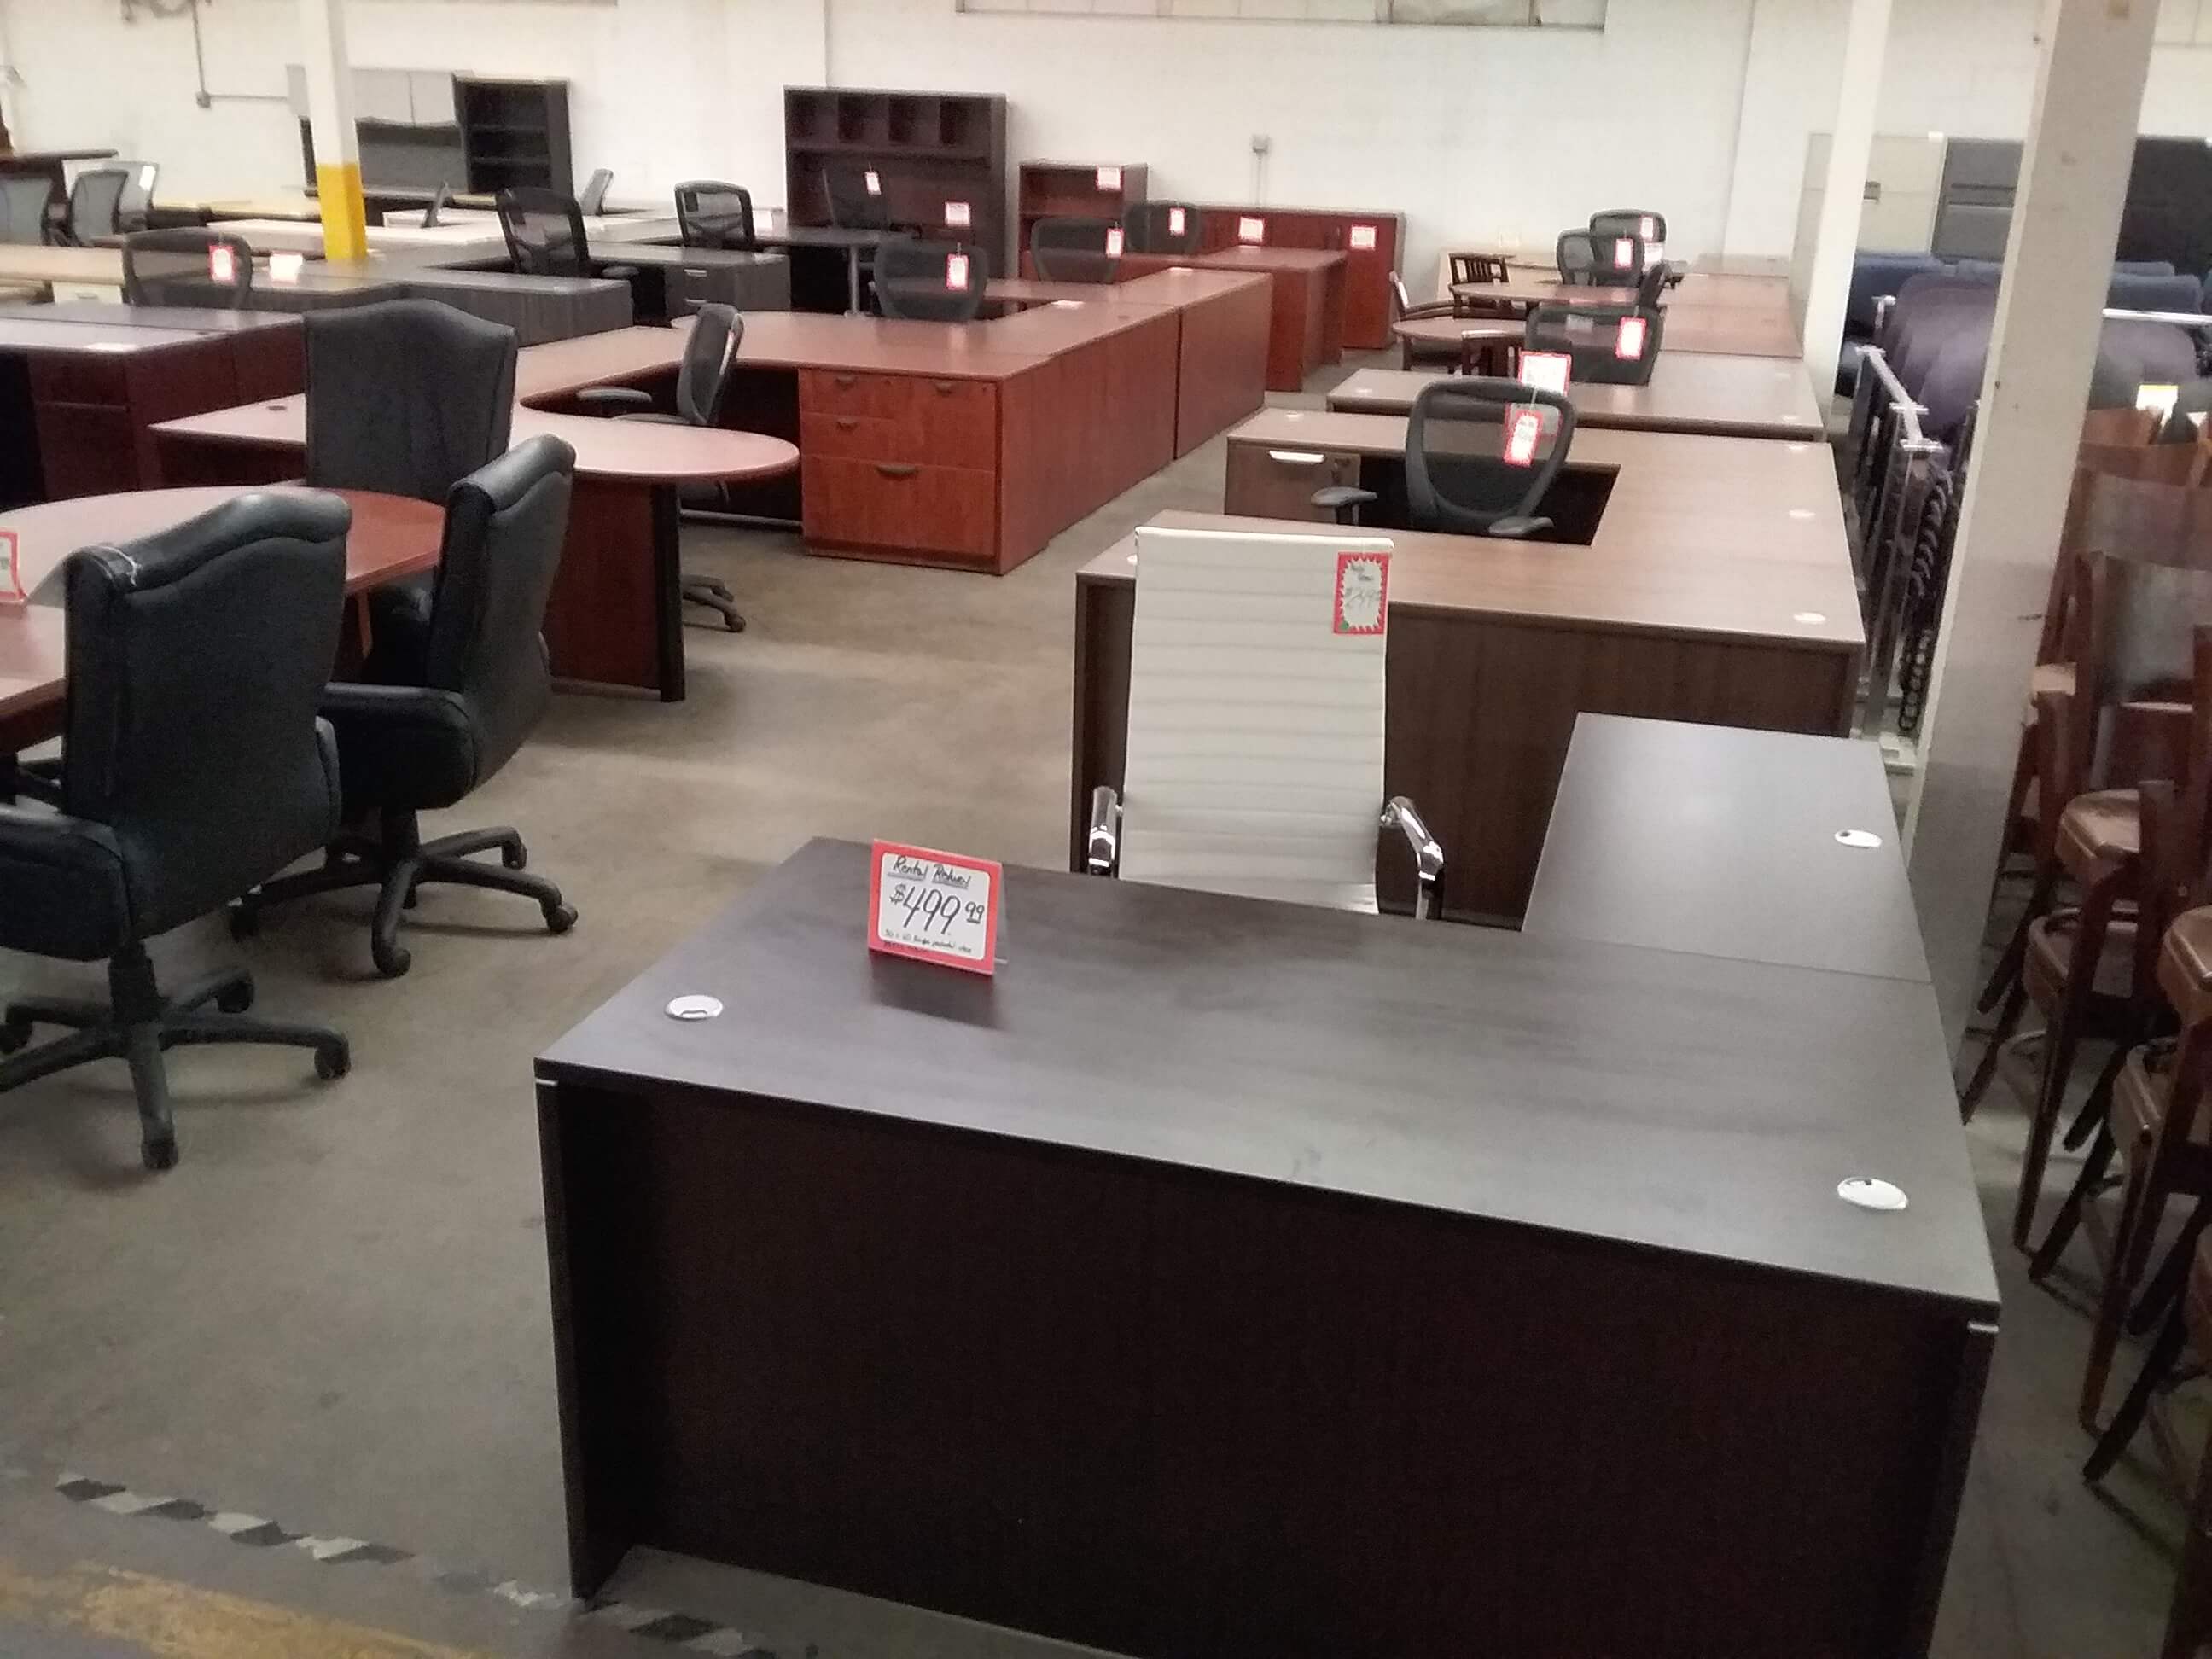 CLOSEOUT USED STUDENT CHAIRS 100'S IN STOCK! DESKS/TABLES TOO MANY STYLES 